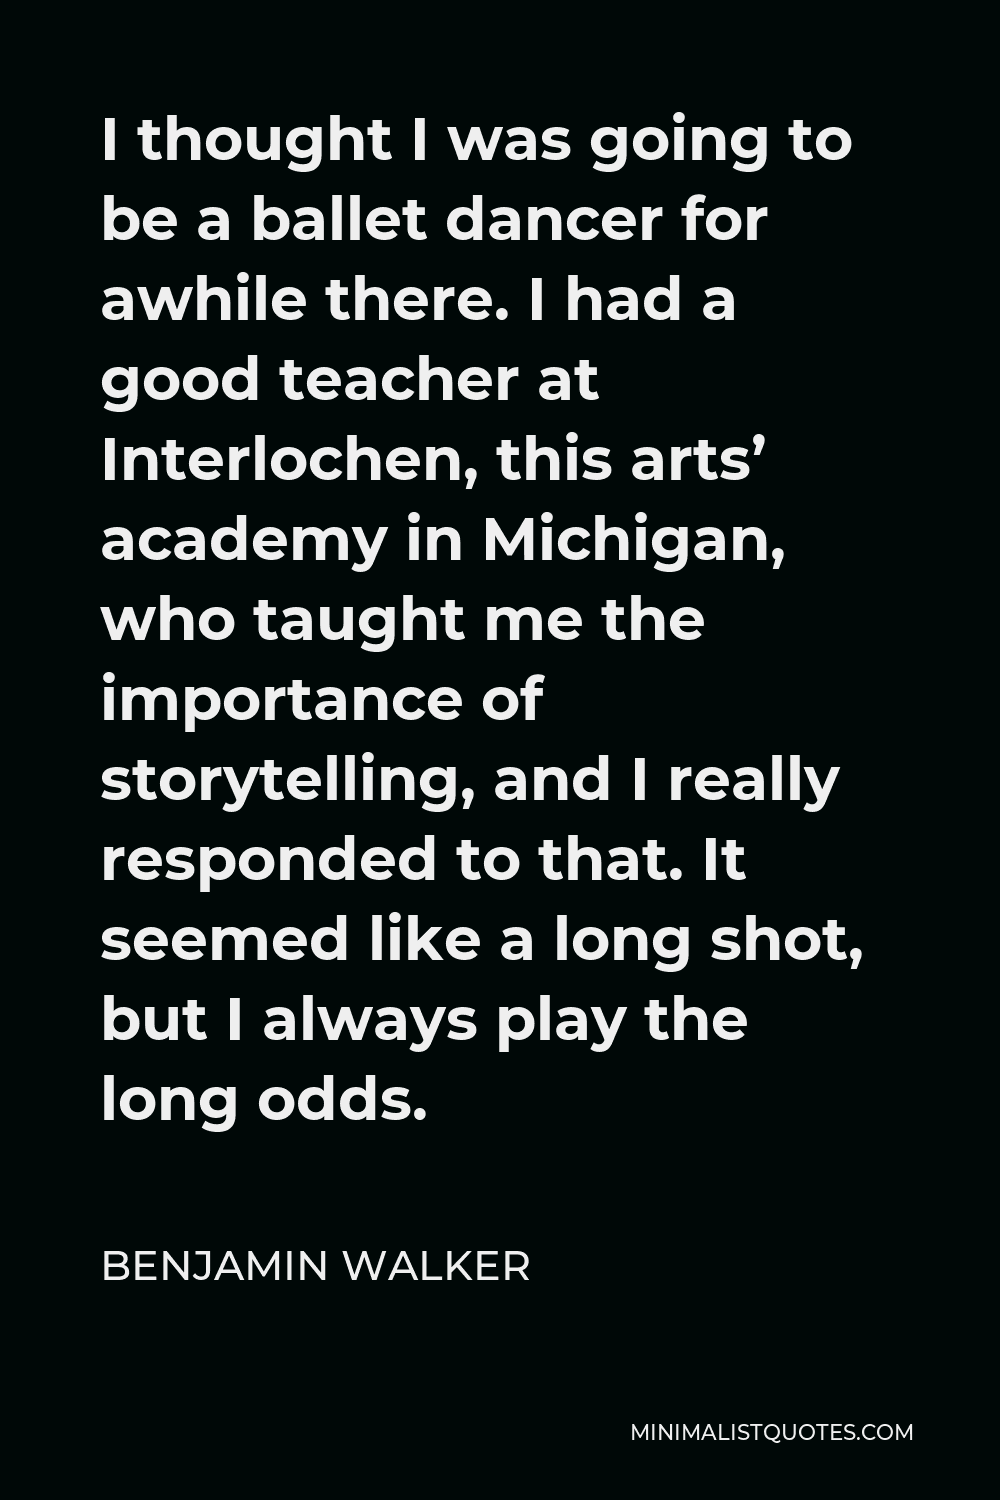 Benjamin Walker Quote - I thought I was going to be a ballet dancer for awhile there. I had a good teacher at Interlochen, this arts’ academy in Michigan, who taught me the importance of storytelling, and I really responded to that. It seemed like a long shot, but I always play the long odds.